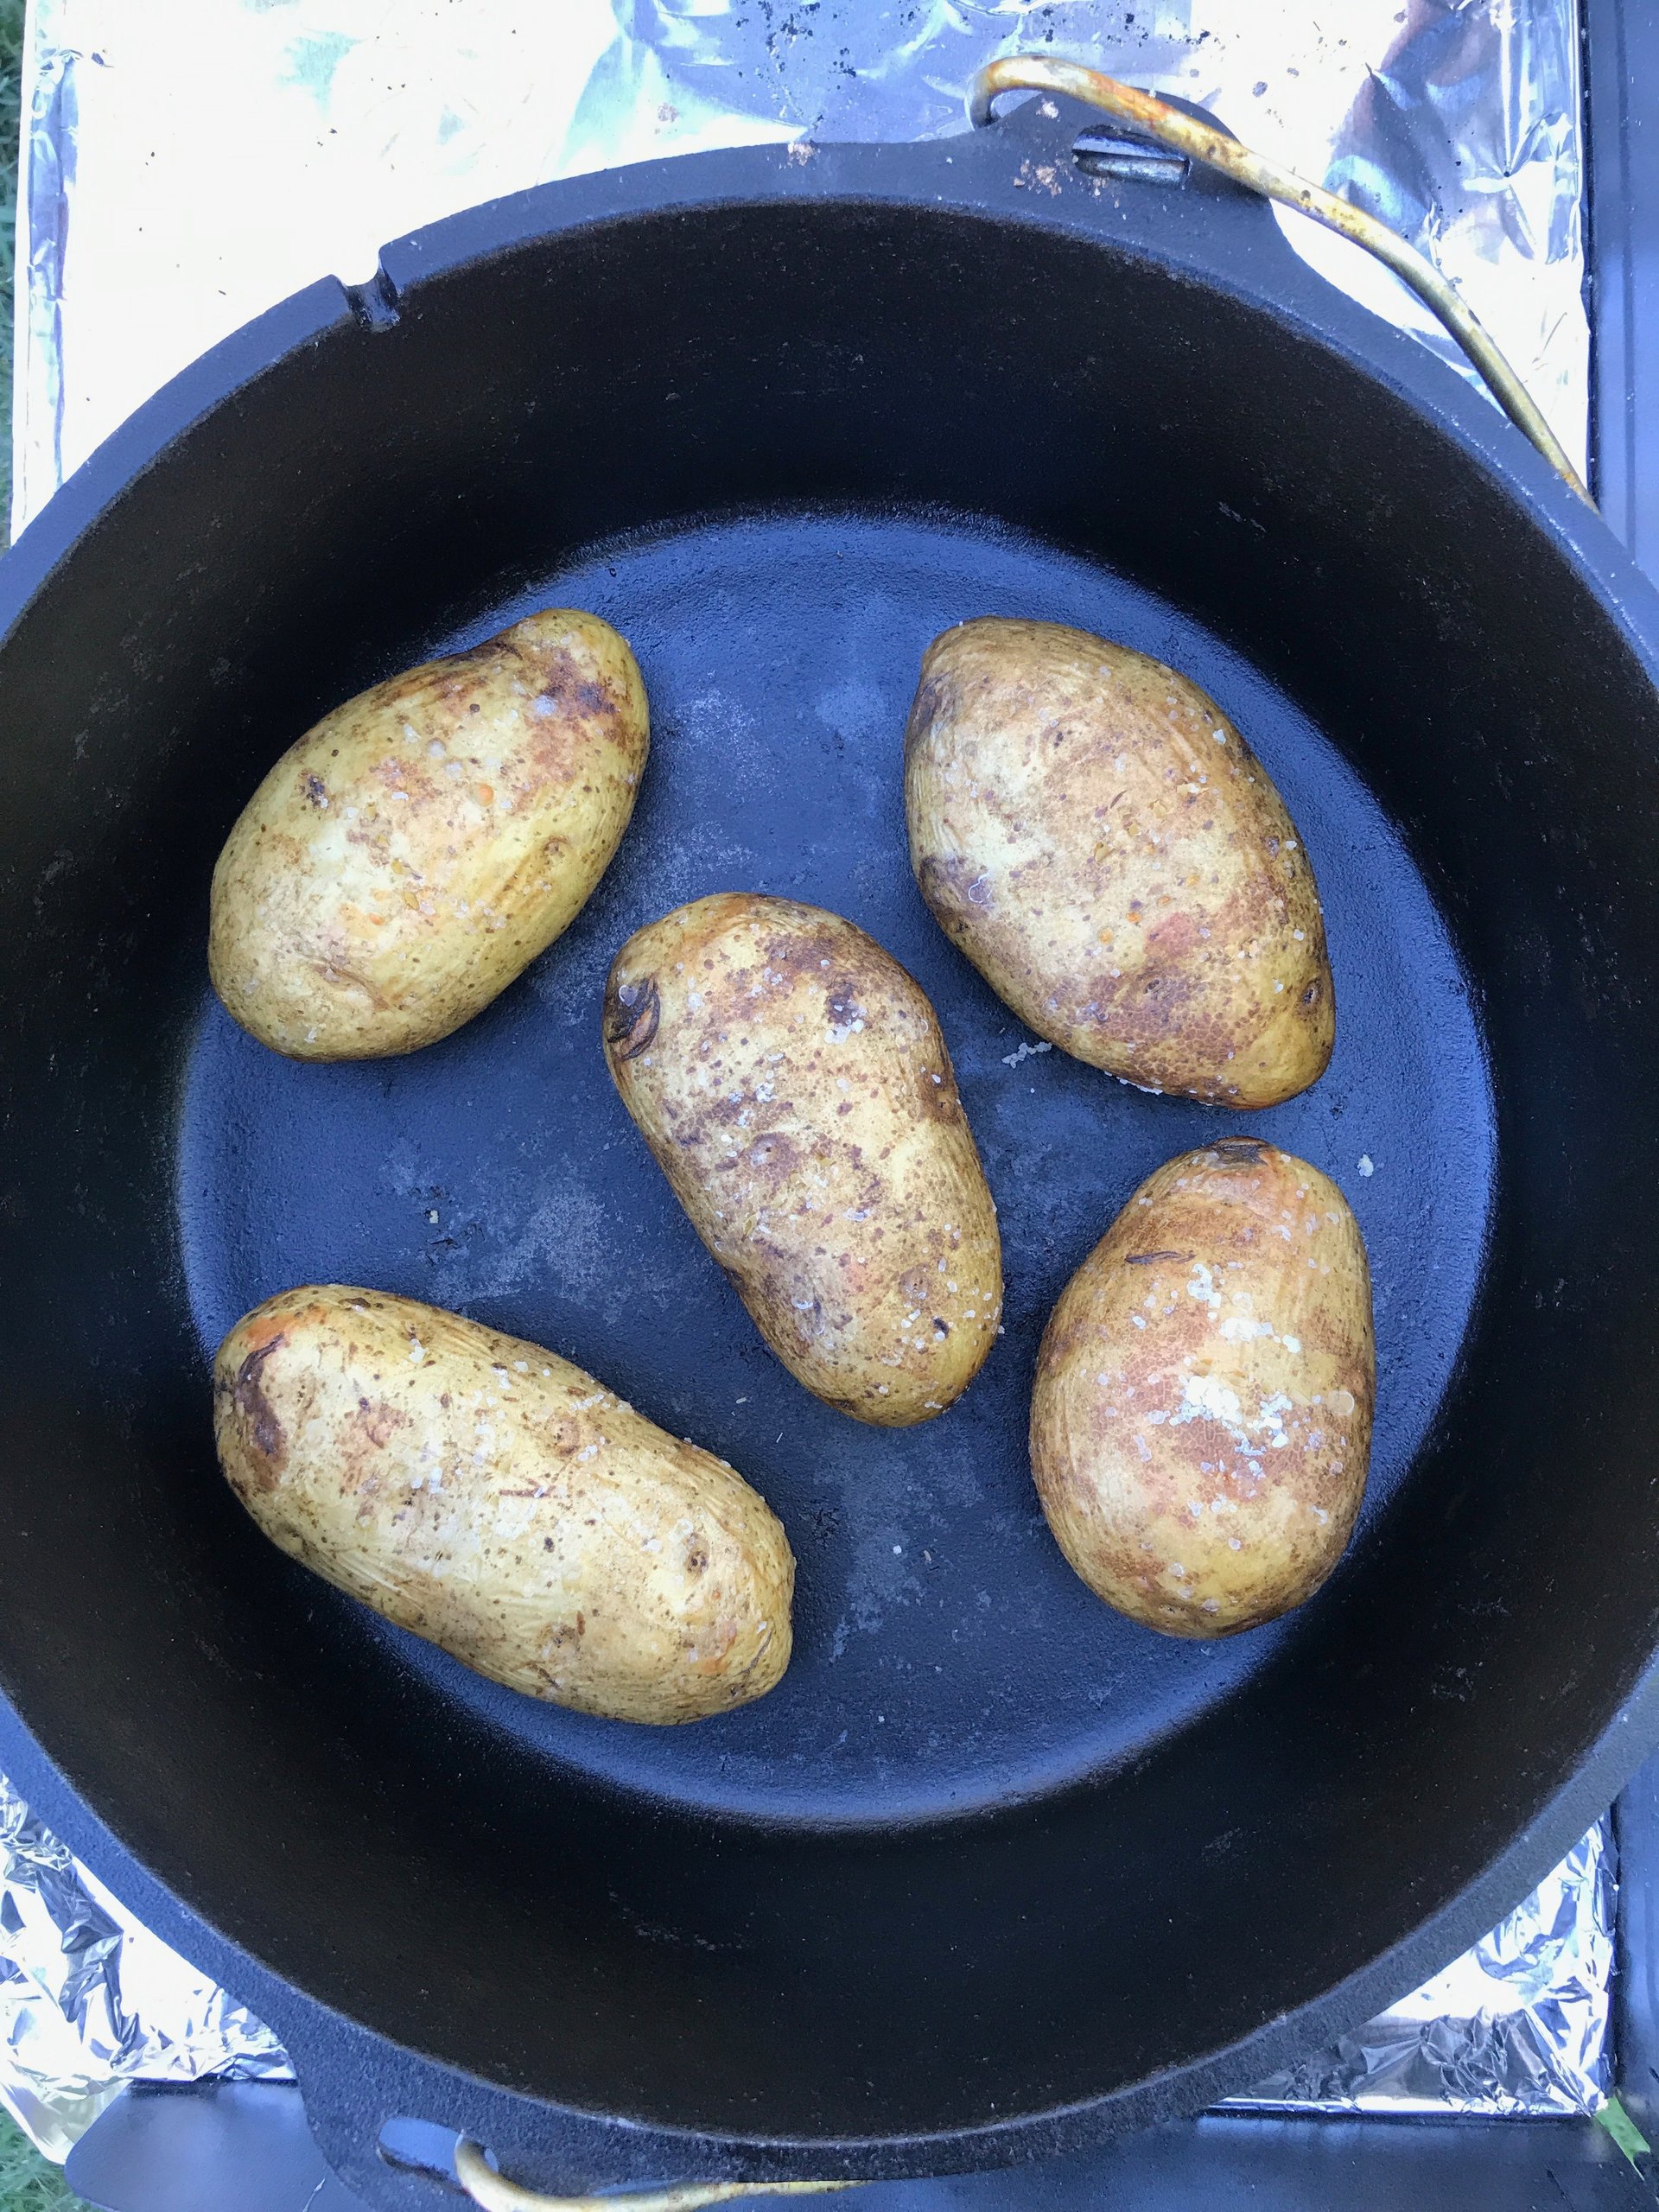 5 russet potatoes in a dutch oven.